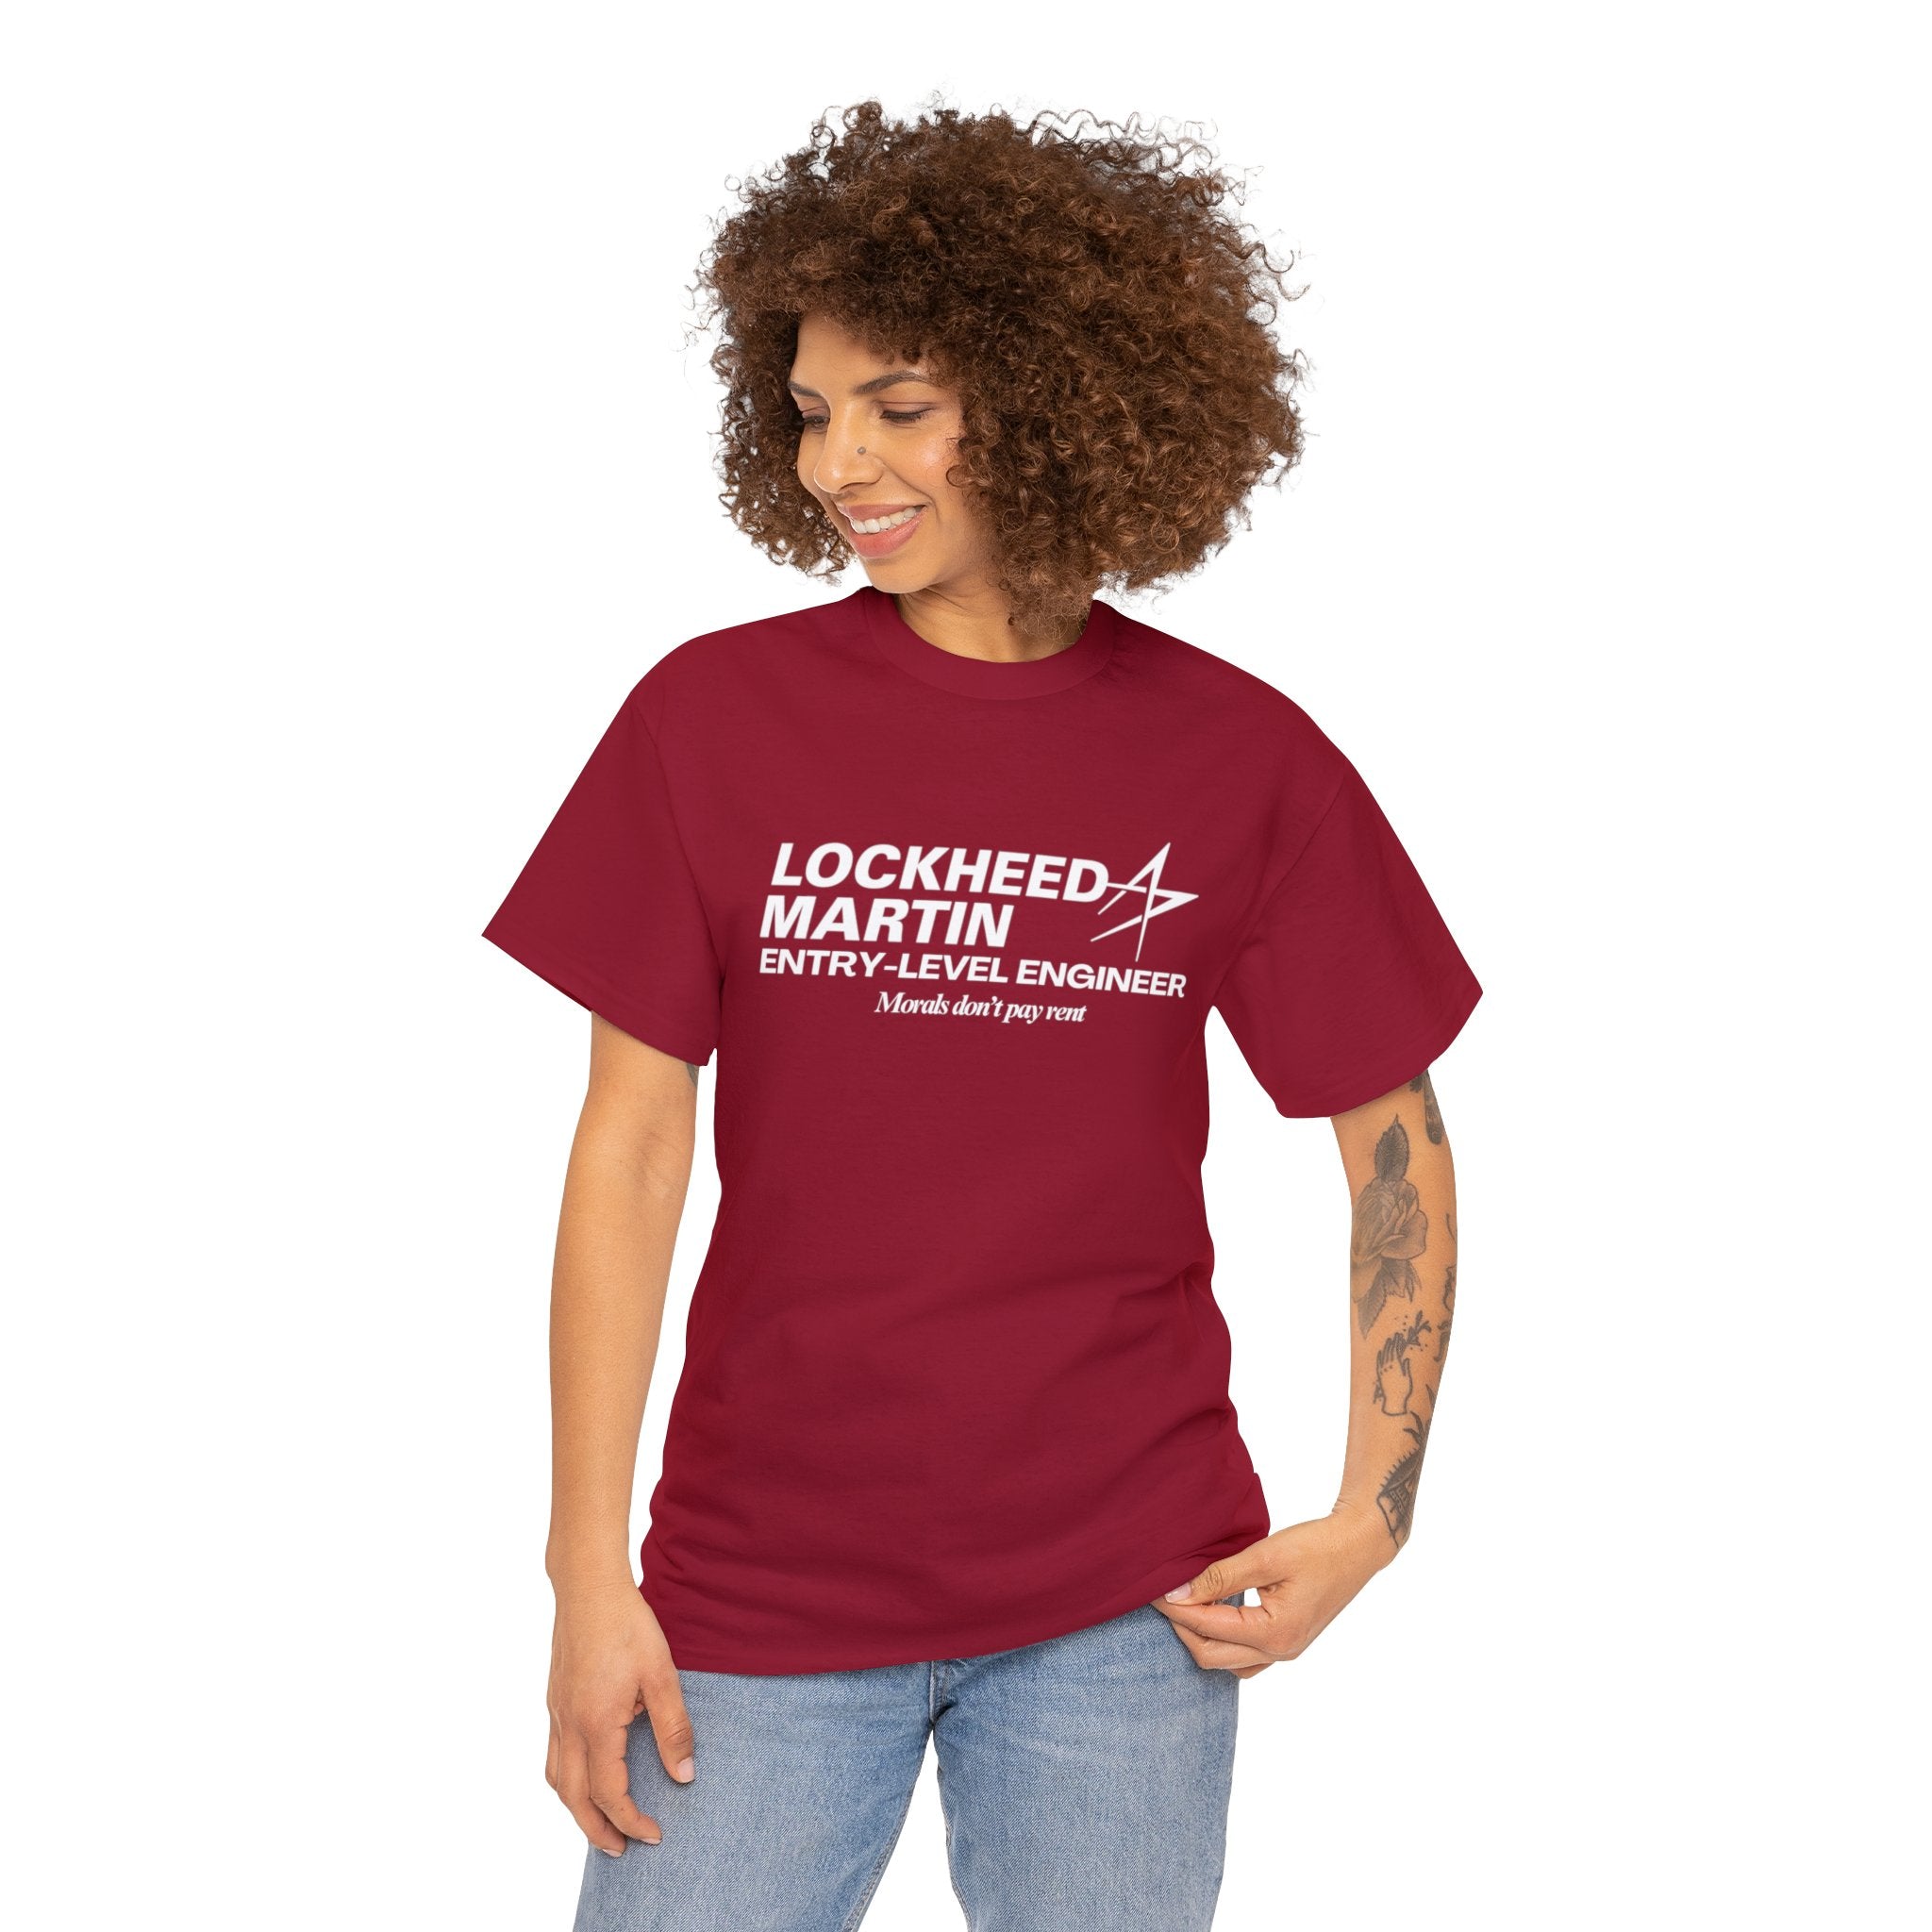 Lockheed Martin Entry Level Engineer (Morals don't pay rent) - Unisex Heavy Cotton Tee